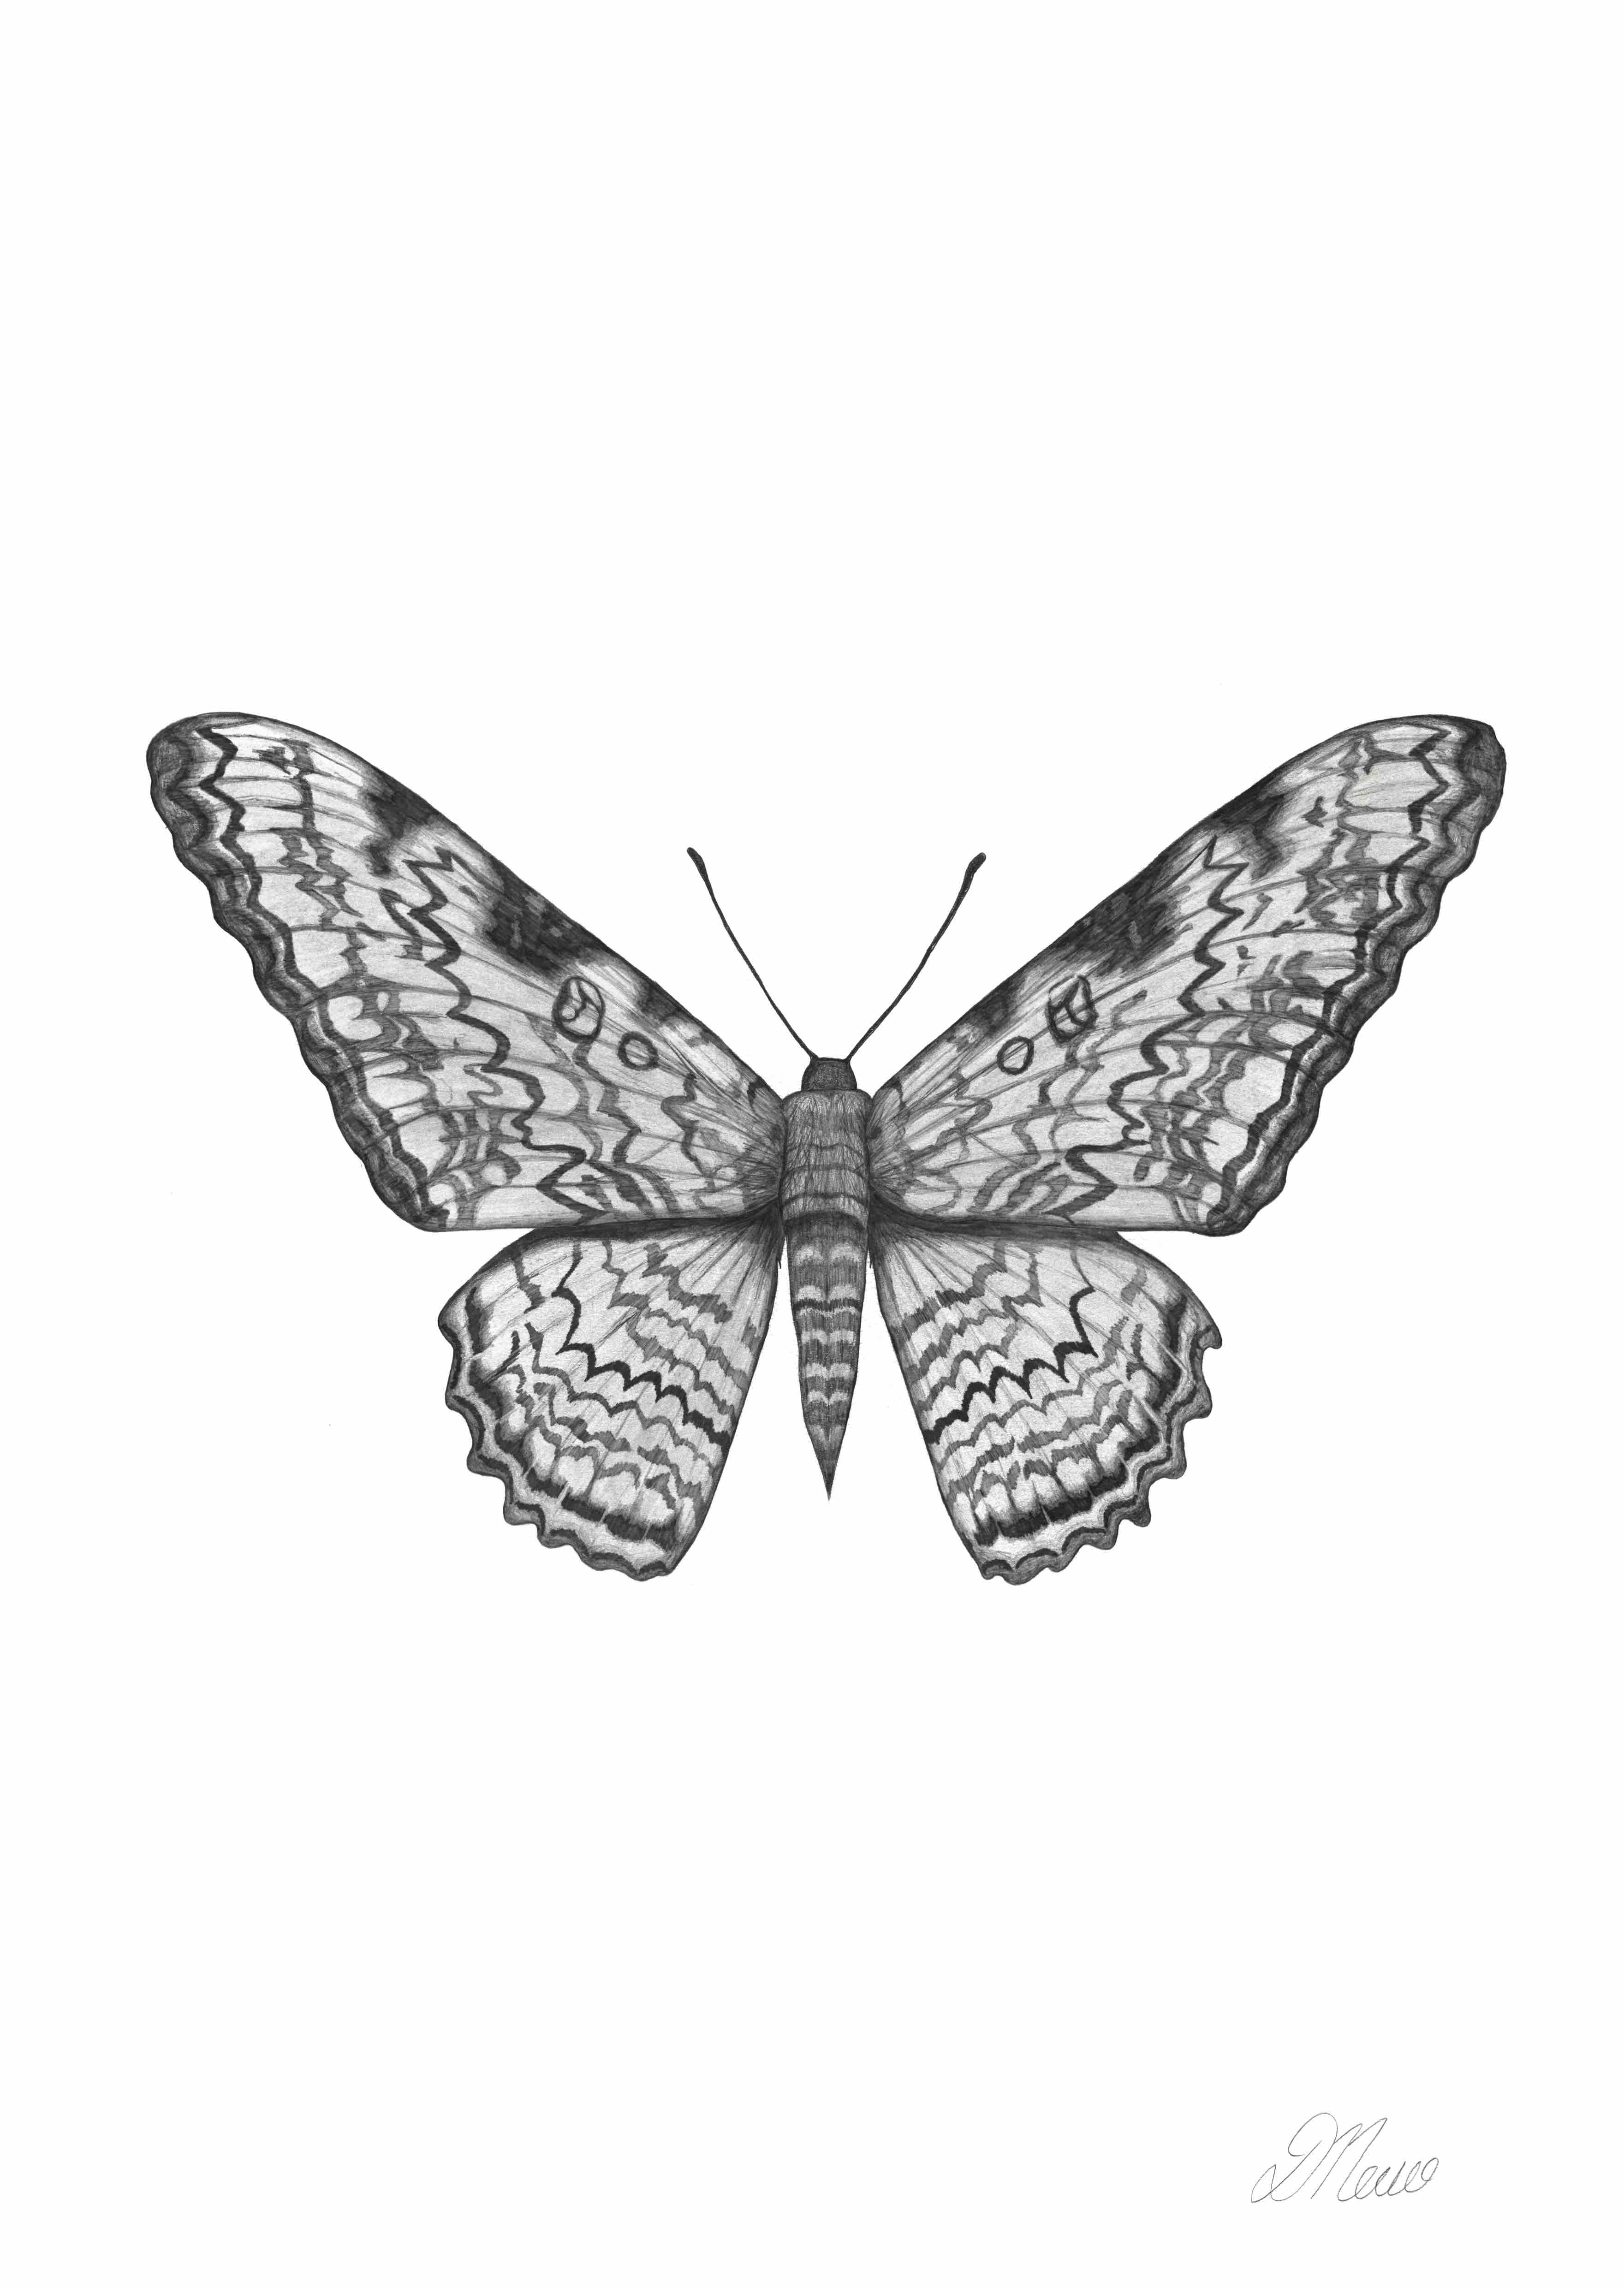 Moth 2 | Pencil Drawing by Debbie New | Size A2 | Limited Edition Prints: 100